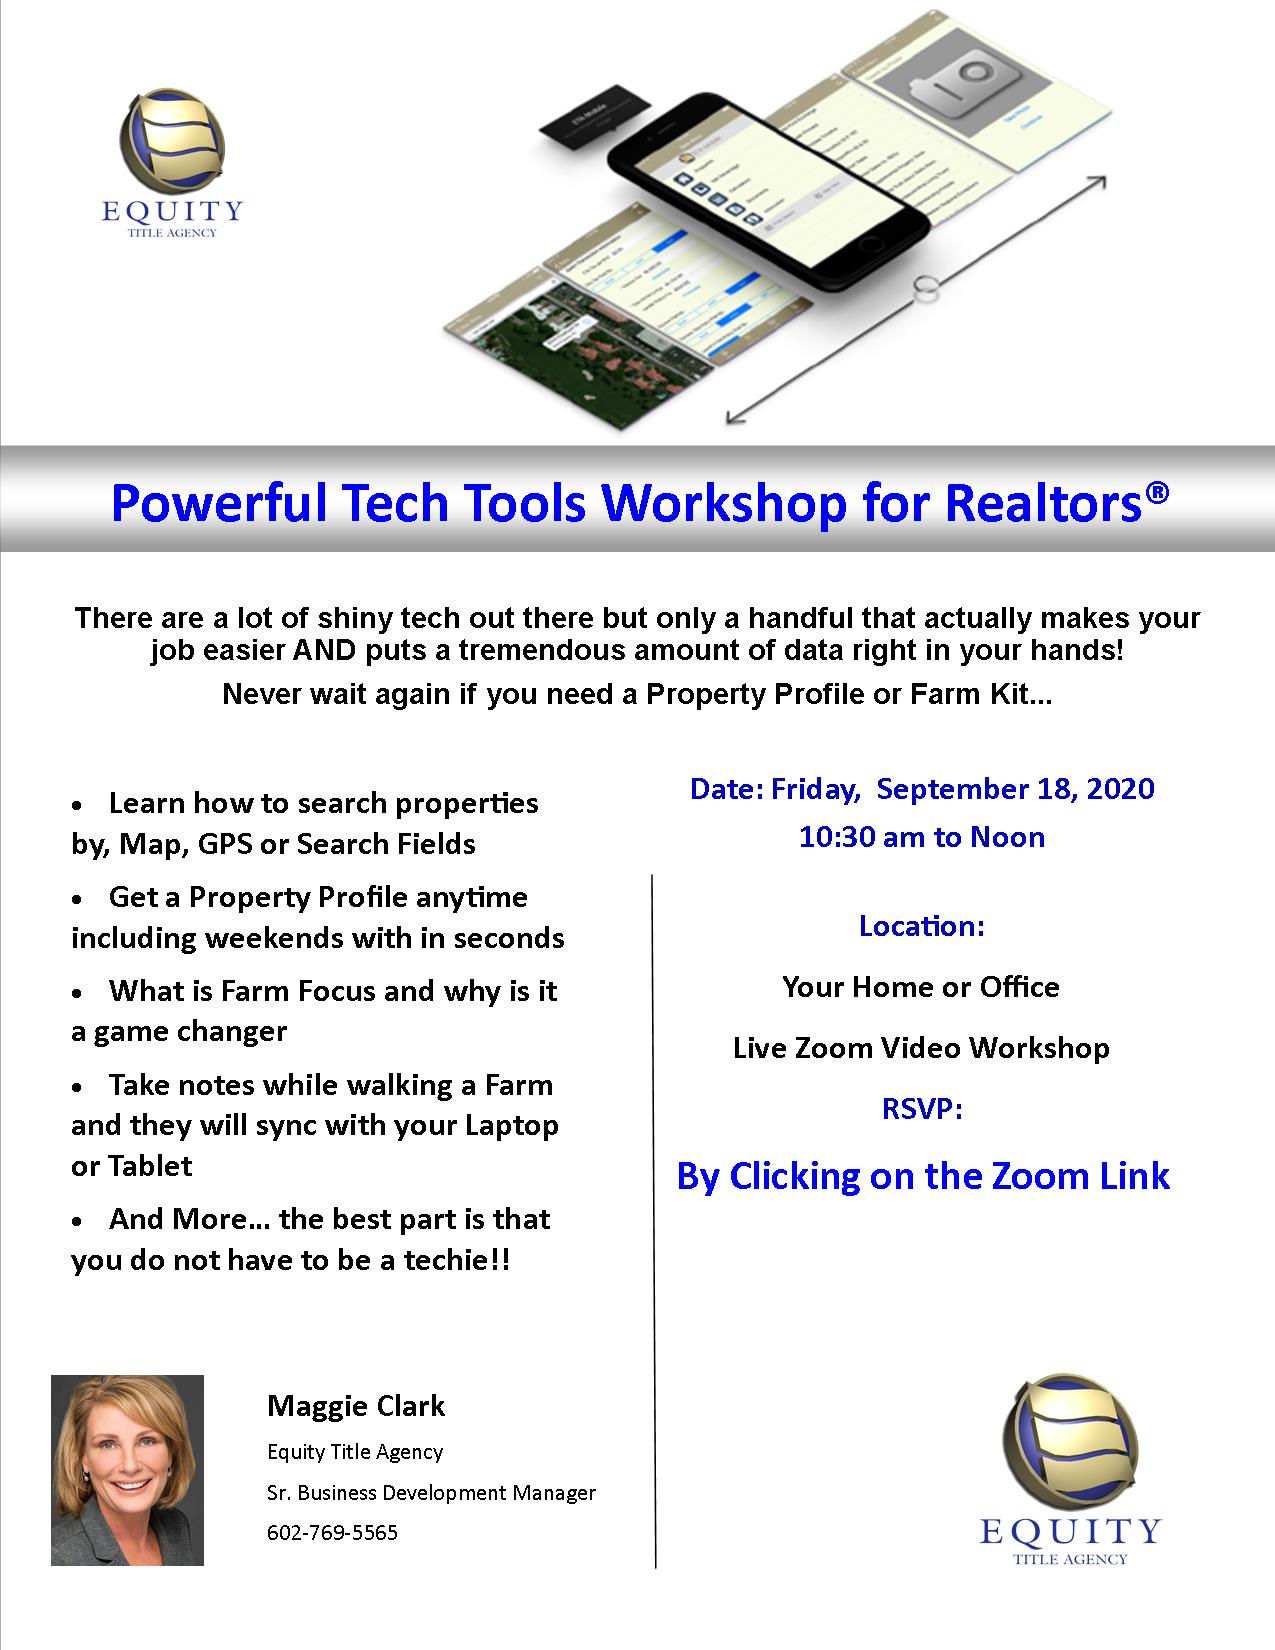 Powerful Tech Tools for Realtors